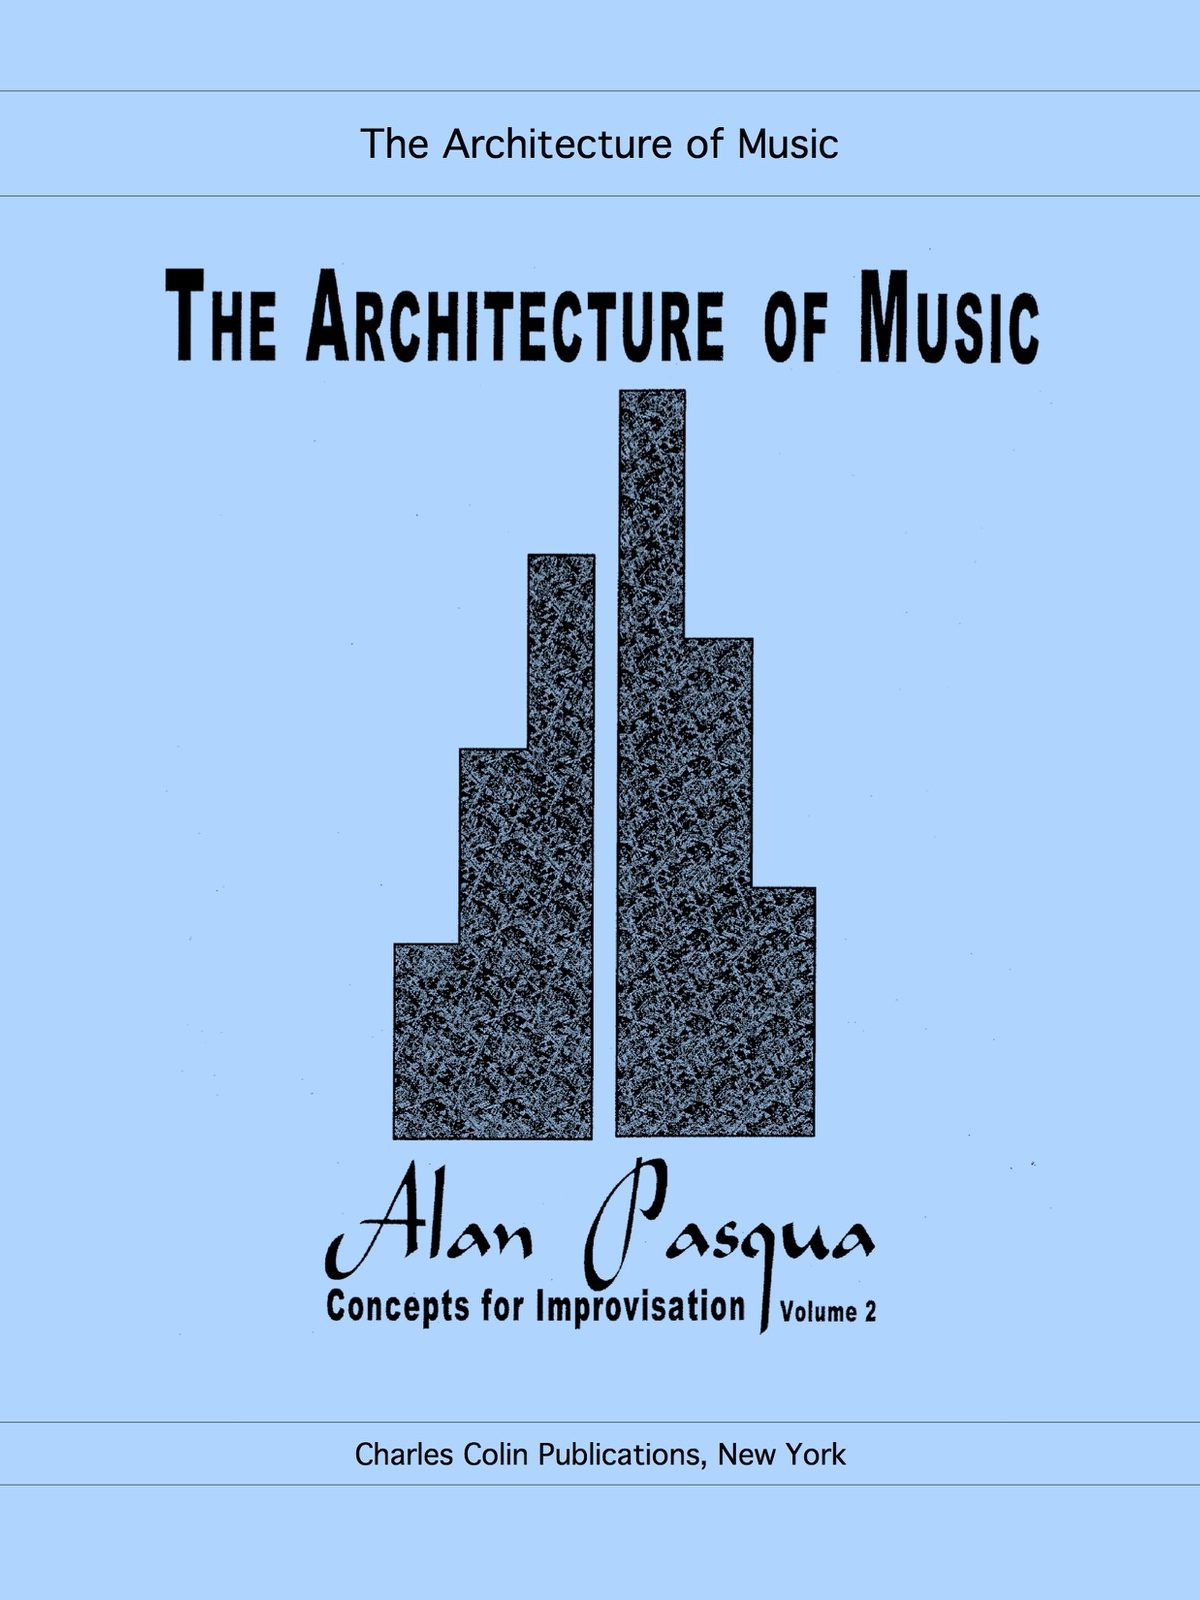 The Architecture of Music (Concepts for Improvisation Vol.2) | Piano Files